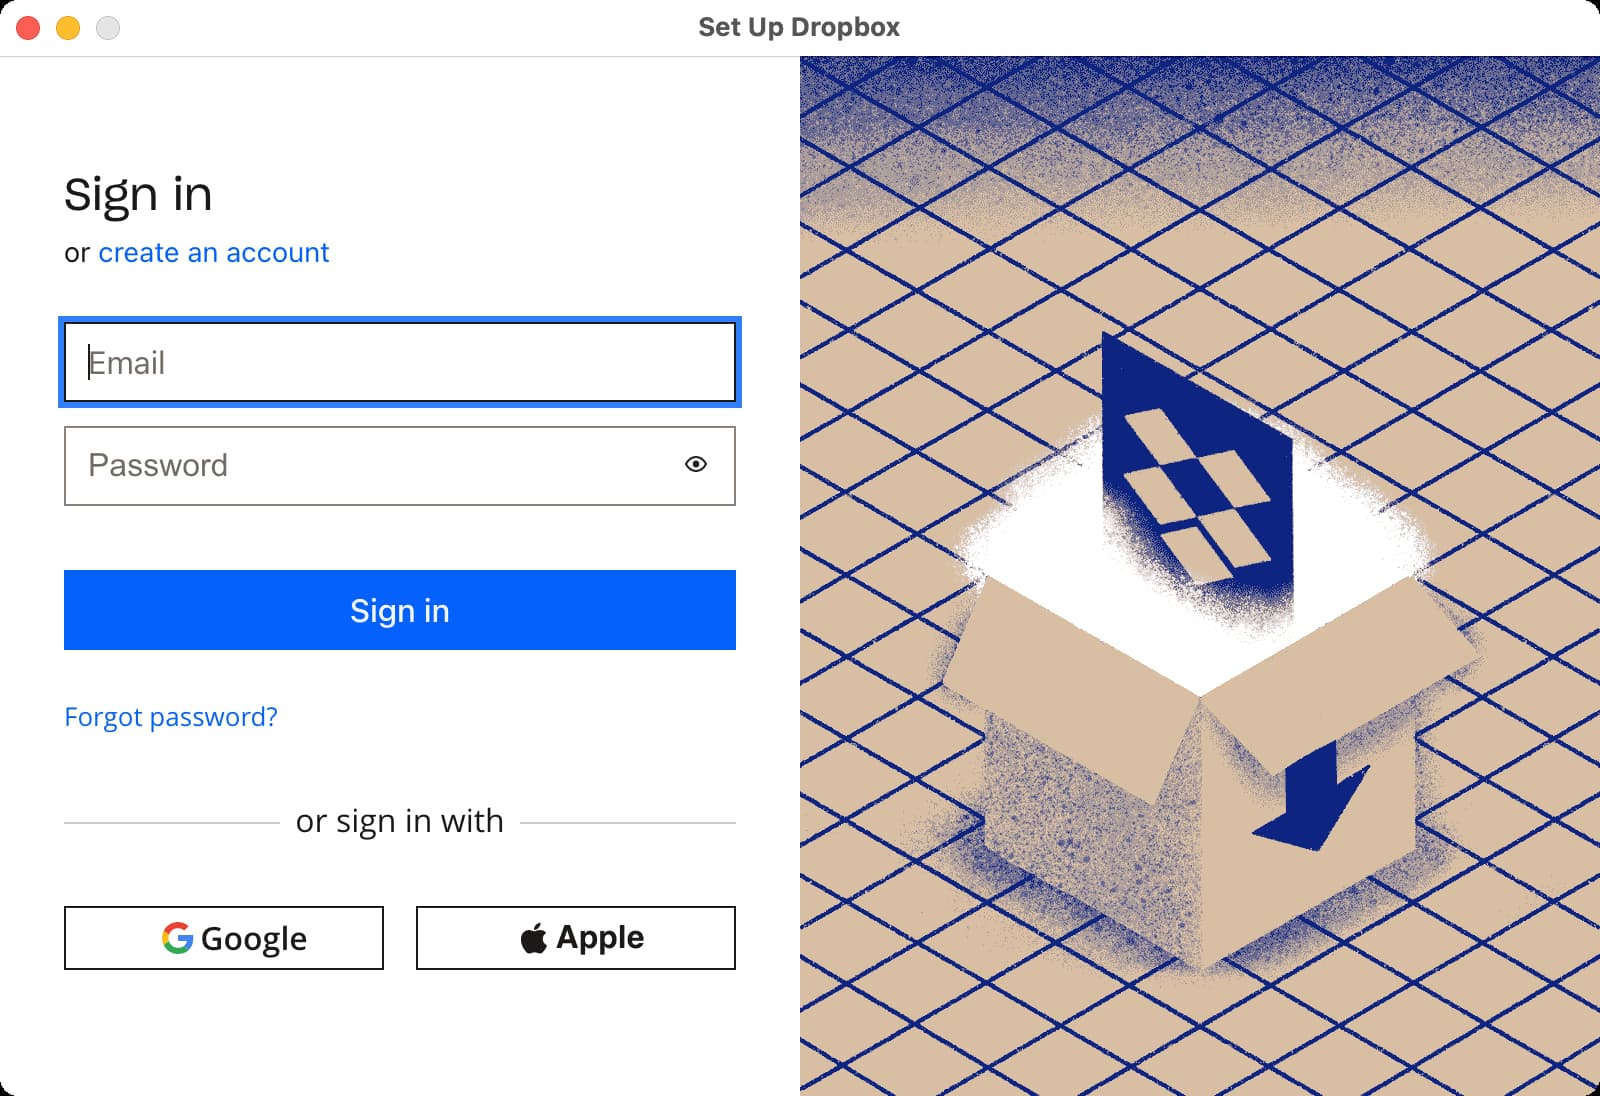 Sign in to Dropbox on Mac